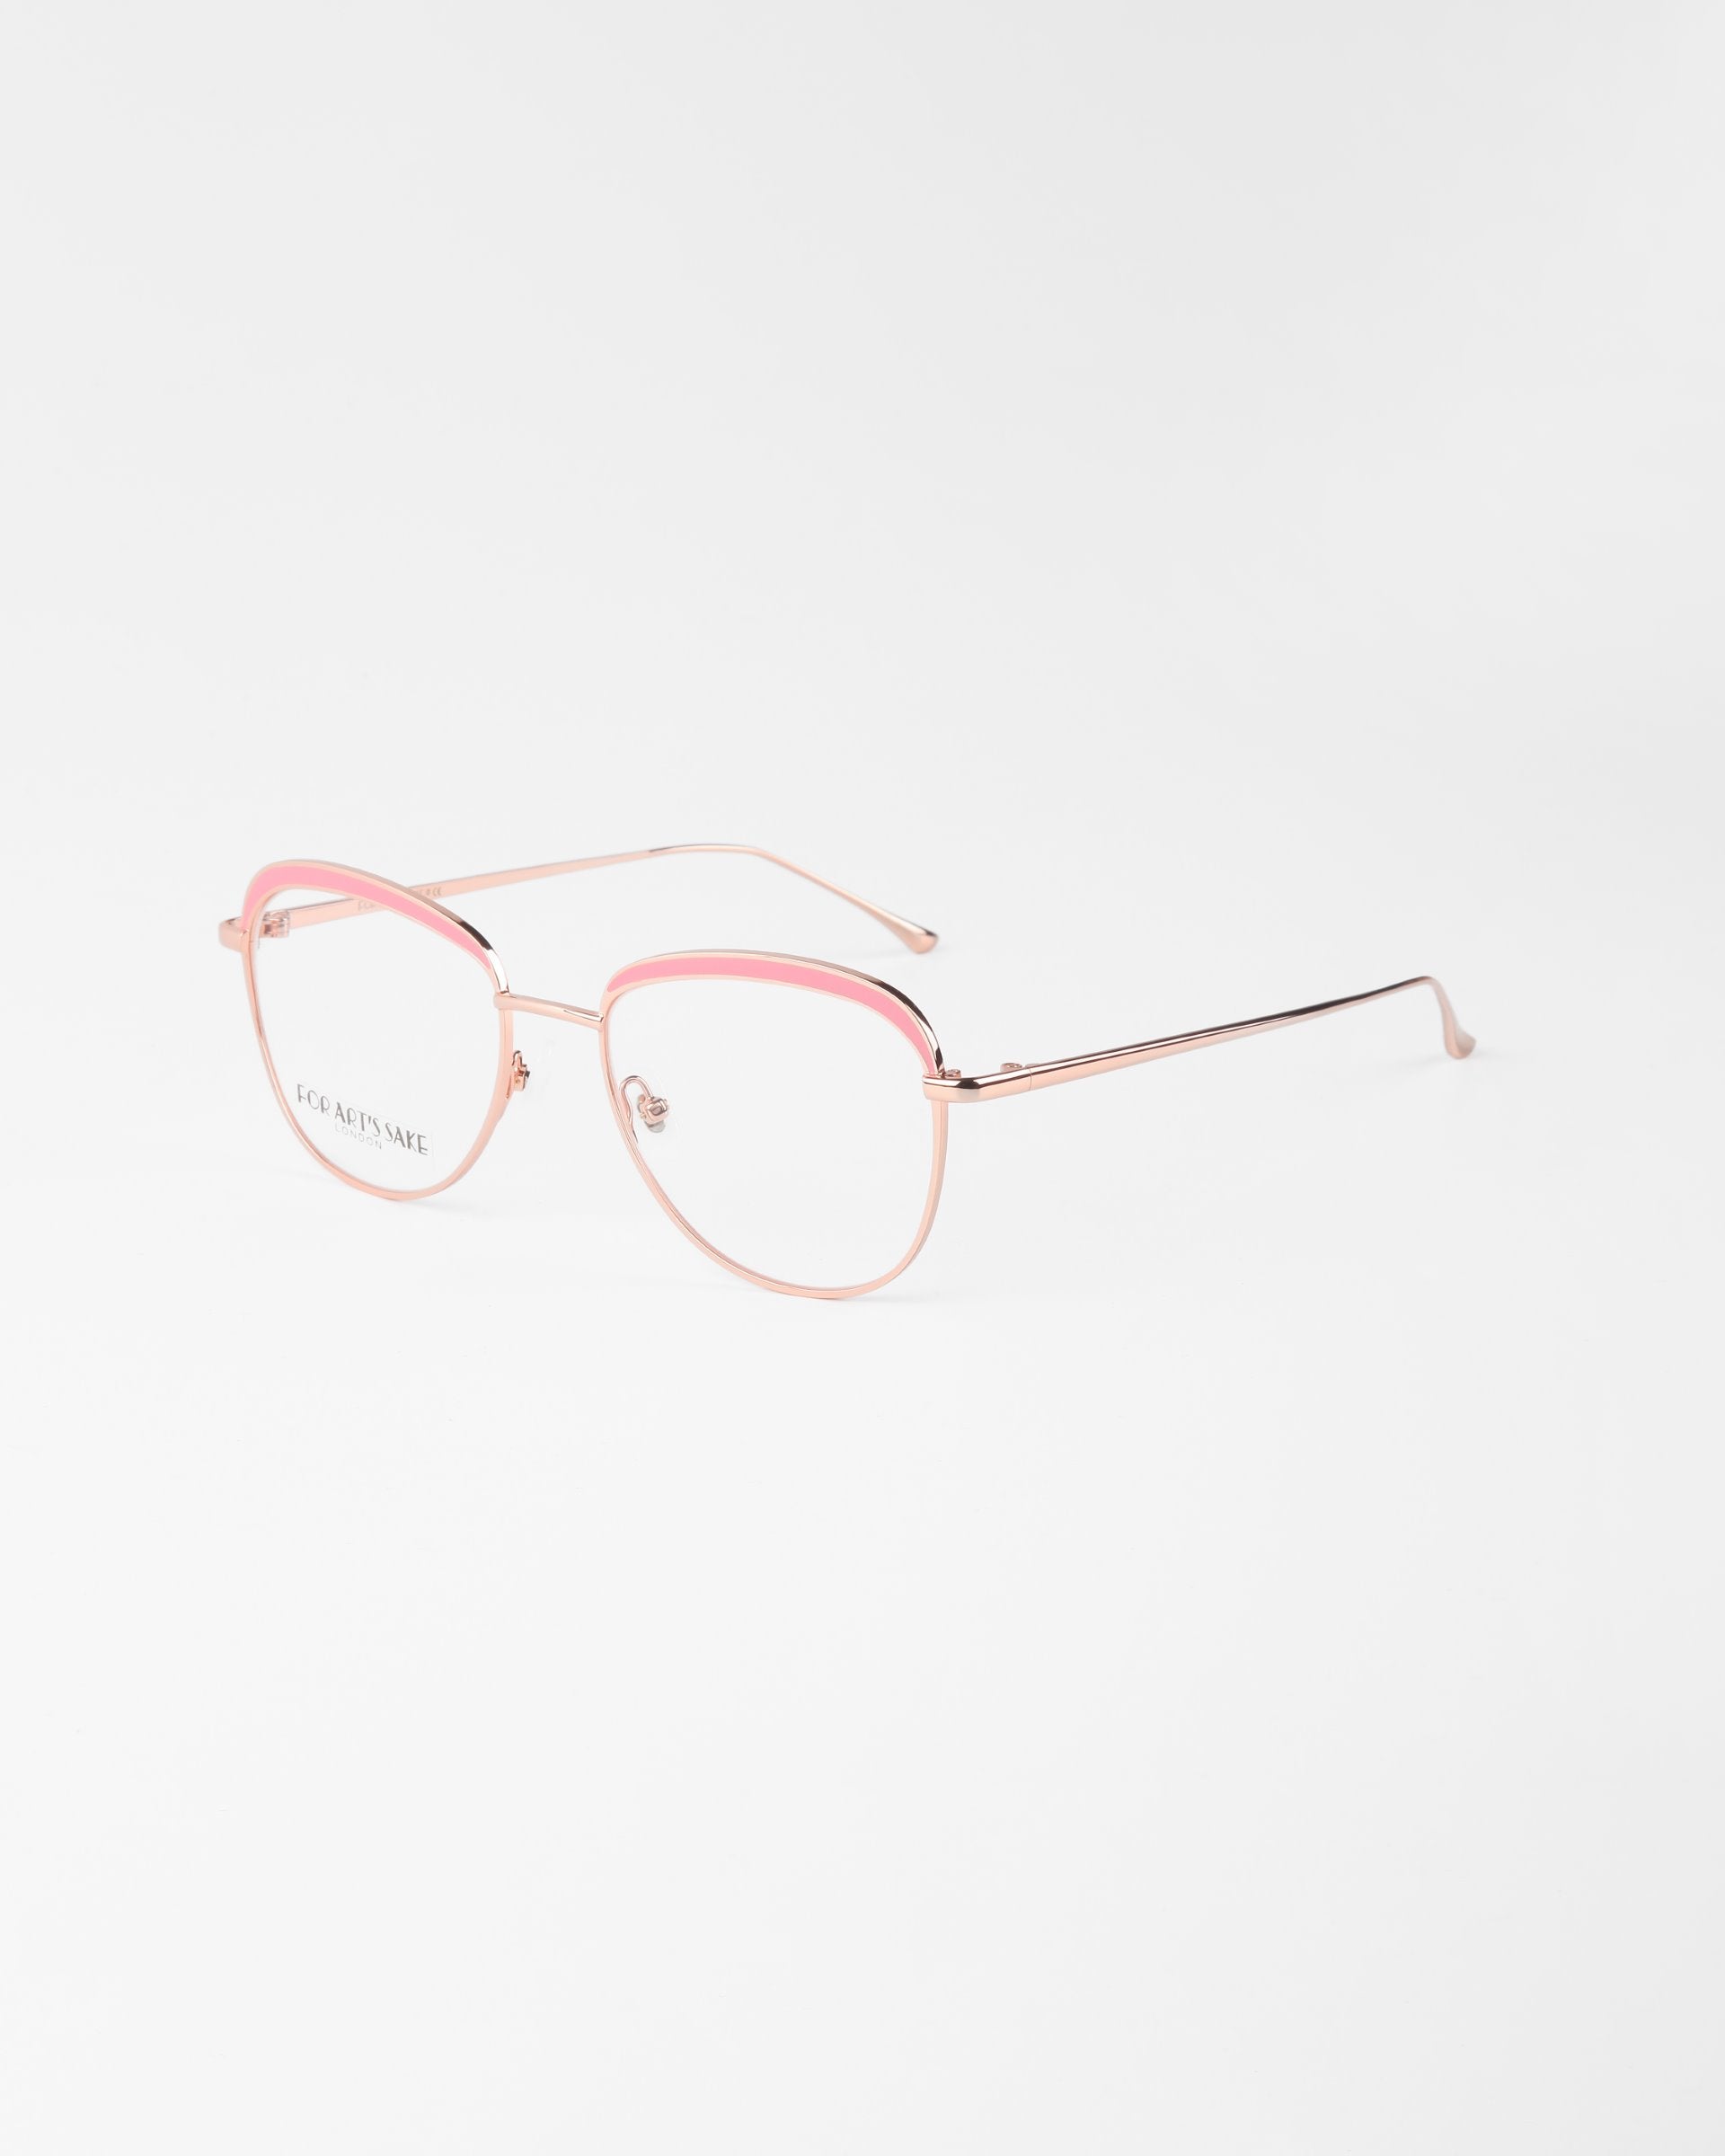 A pair of eyeglasses with delicate pink metal frames. The Smoothie by For Art's Sake® features rounded lenses with blue light filter technology and a thin bridge, with the temples extending gracefully from the hinges. The overall design is sleek and minimalist, set against a plain white background.